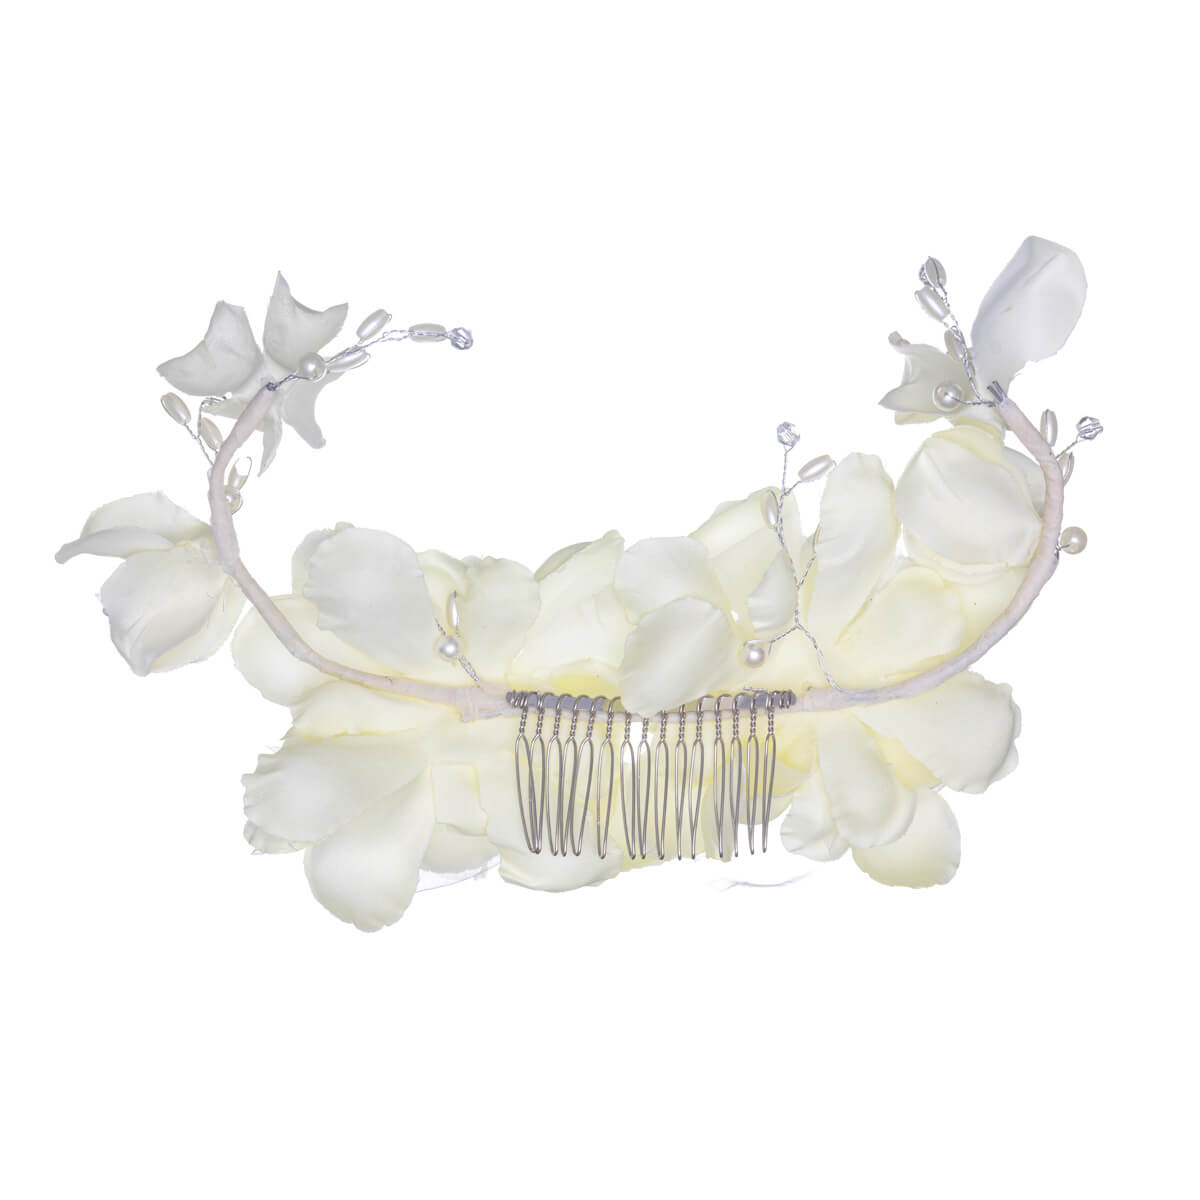 Fabric flower shaped hairpiece with side comb